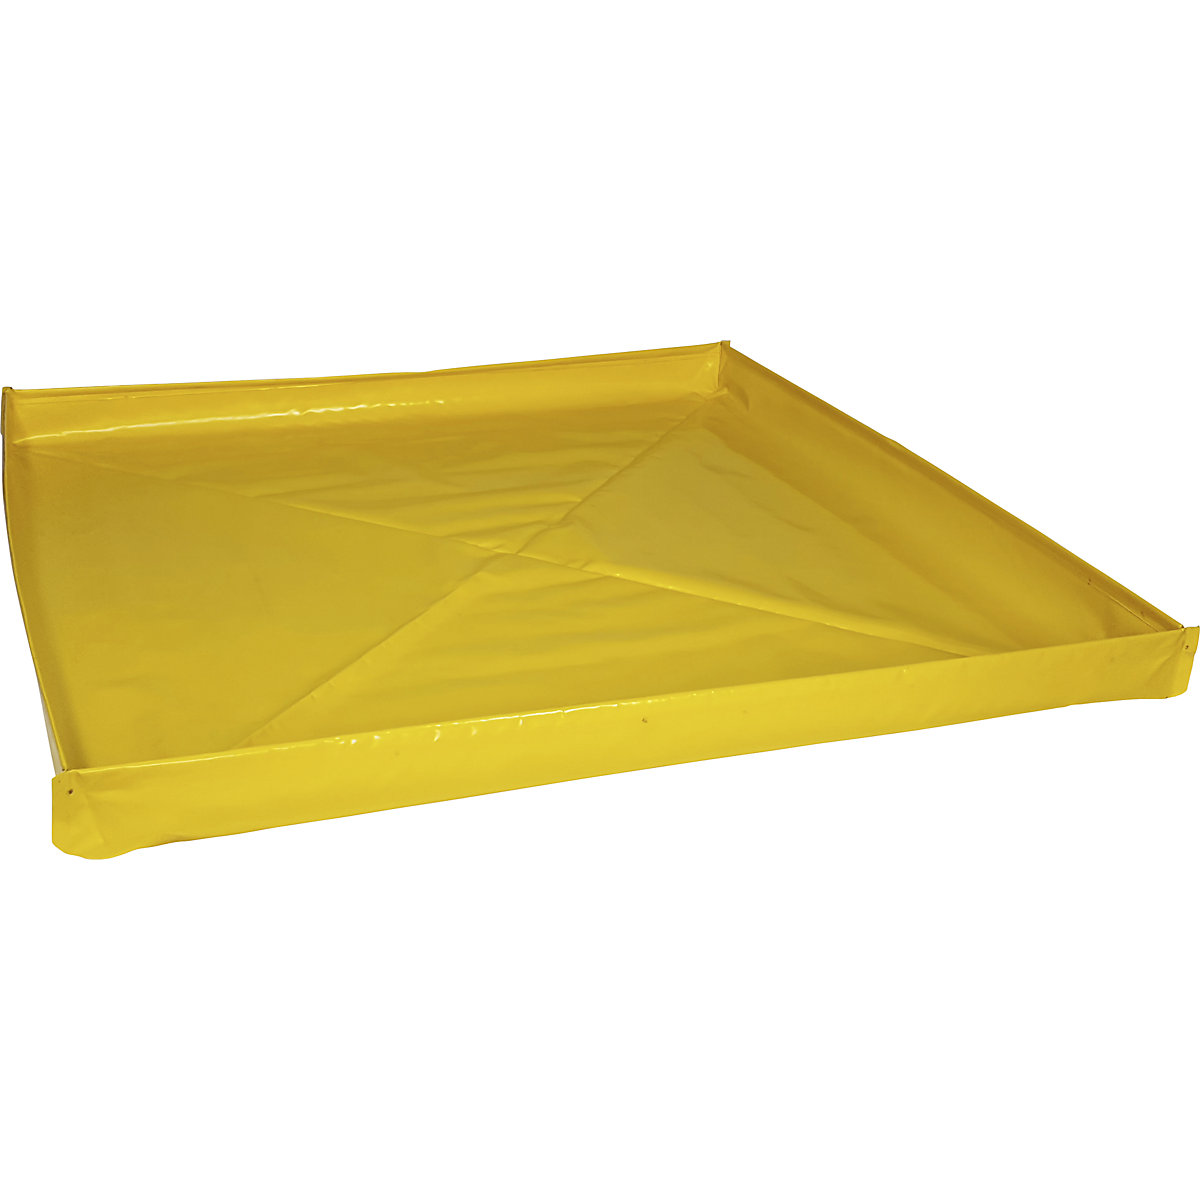 Folding tray small container – eurokraft basic, made of PVC, collection capacity 172 l, 3+ items-6